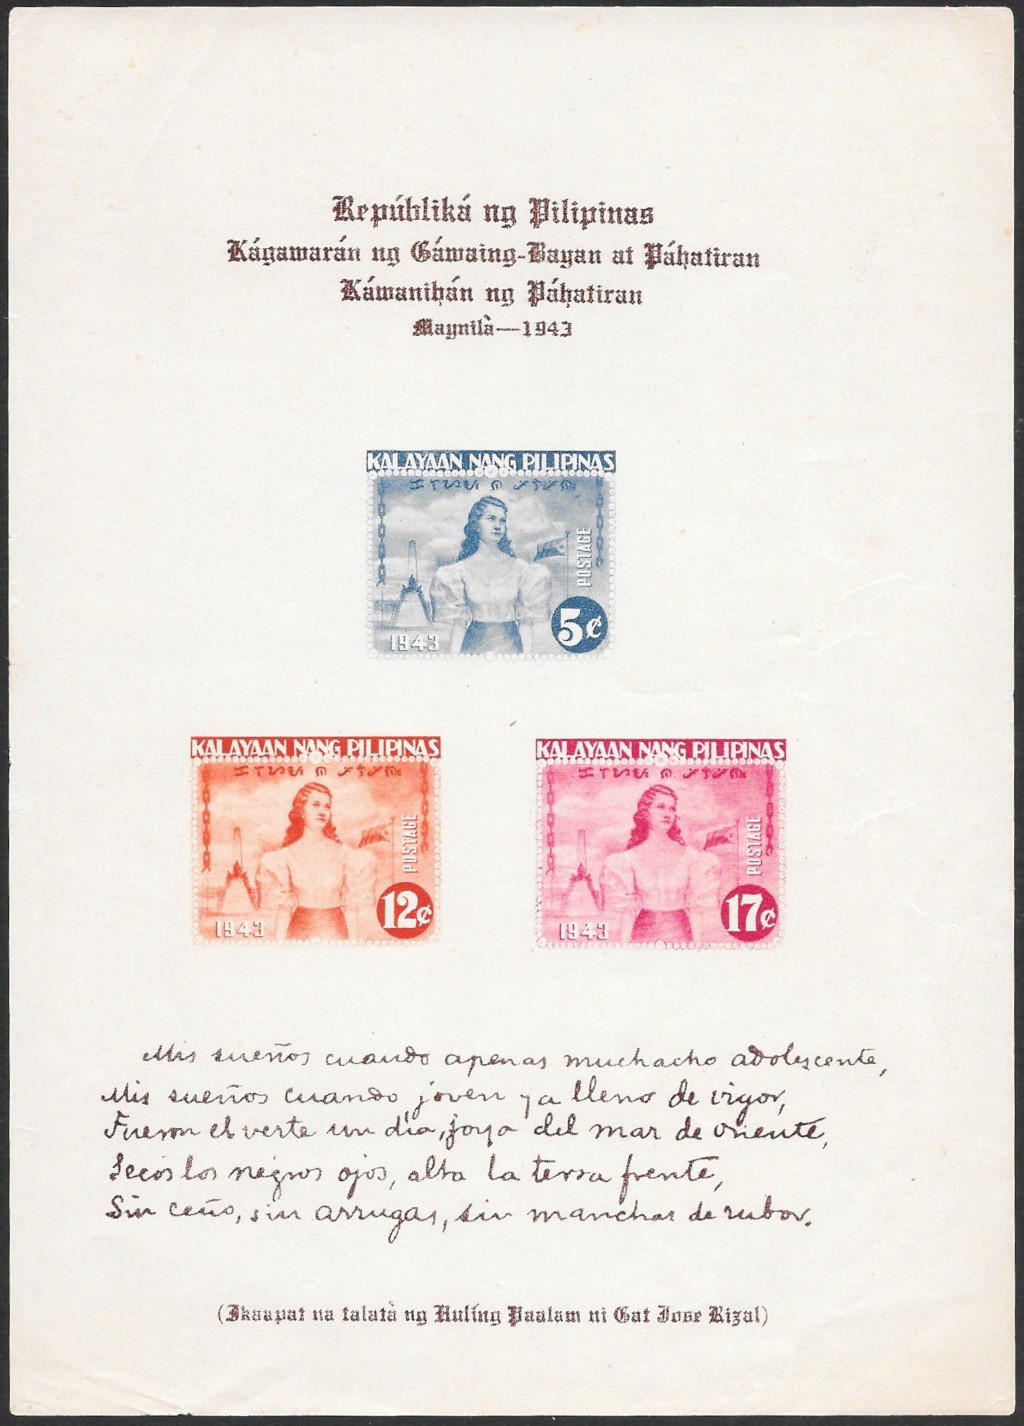 Philippine Semi-Postal Souvenir Sheet from 1943 - Declaration of Independence